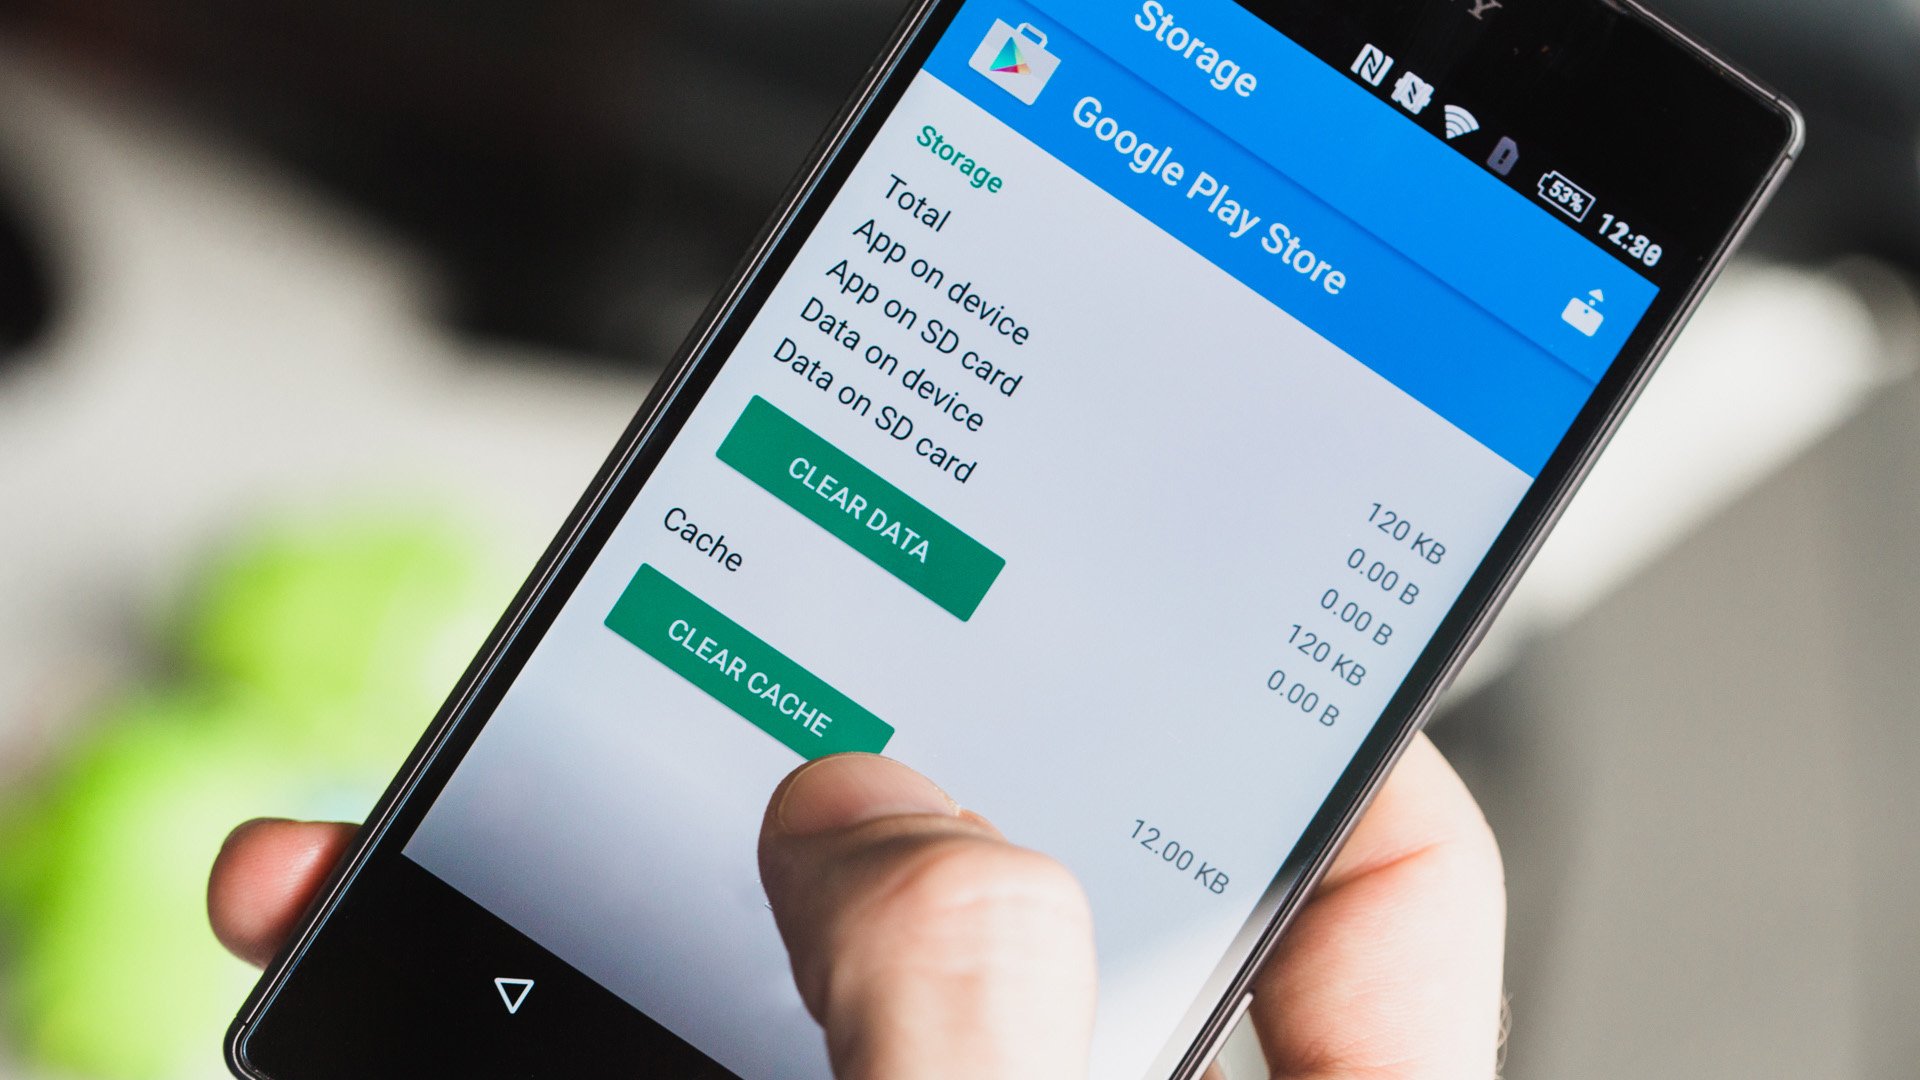 How To Clear Up Storage On Android